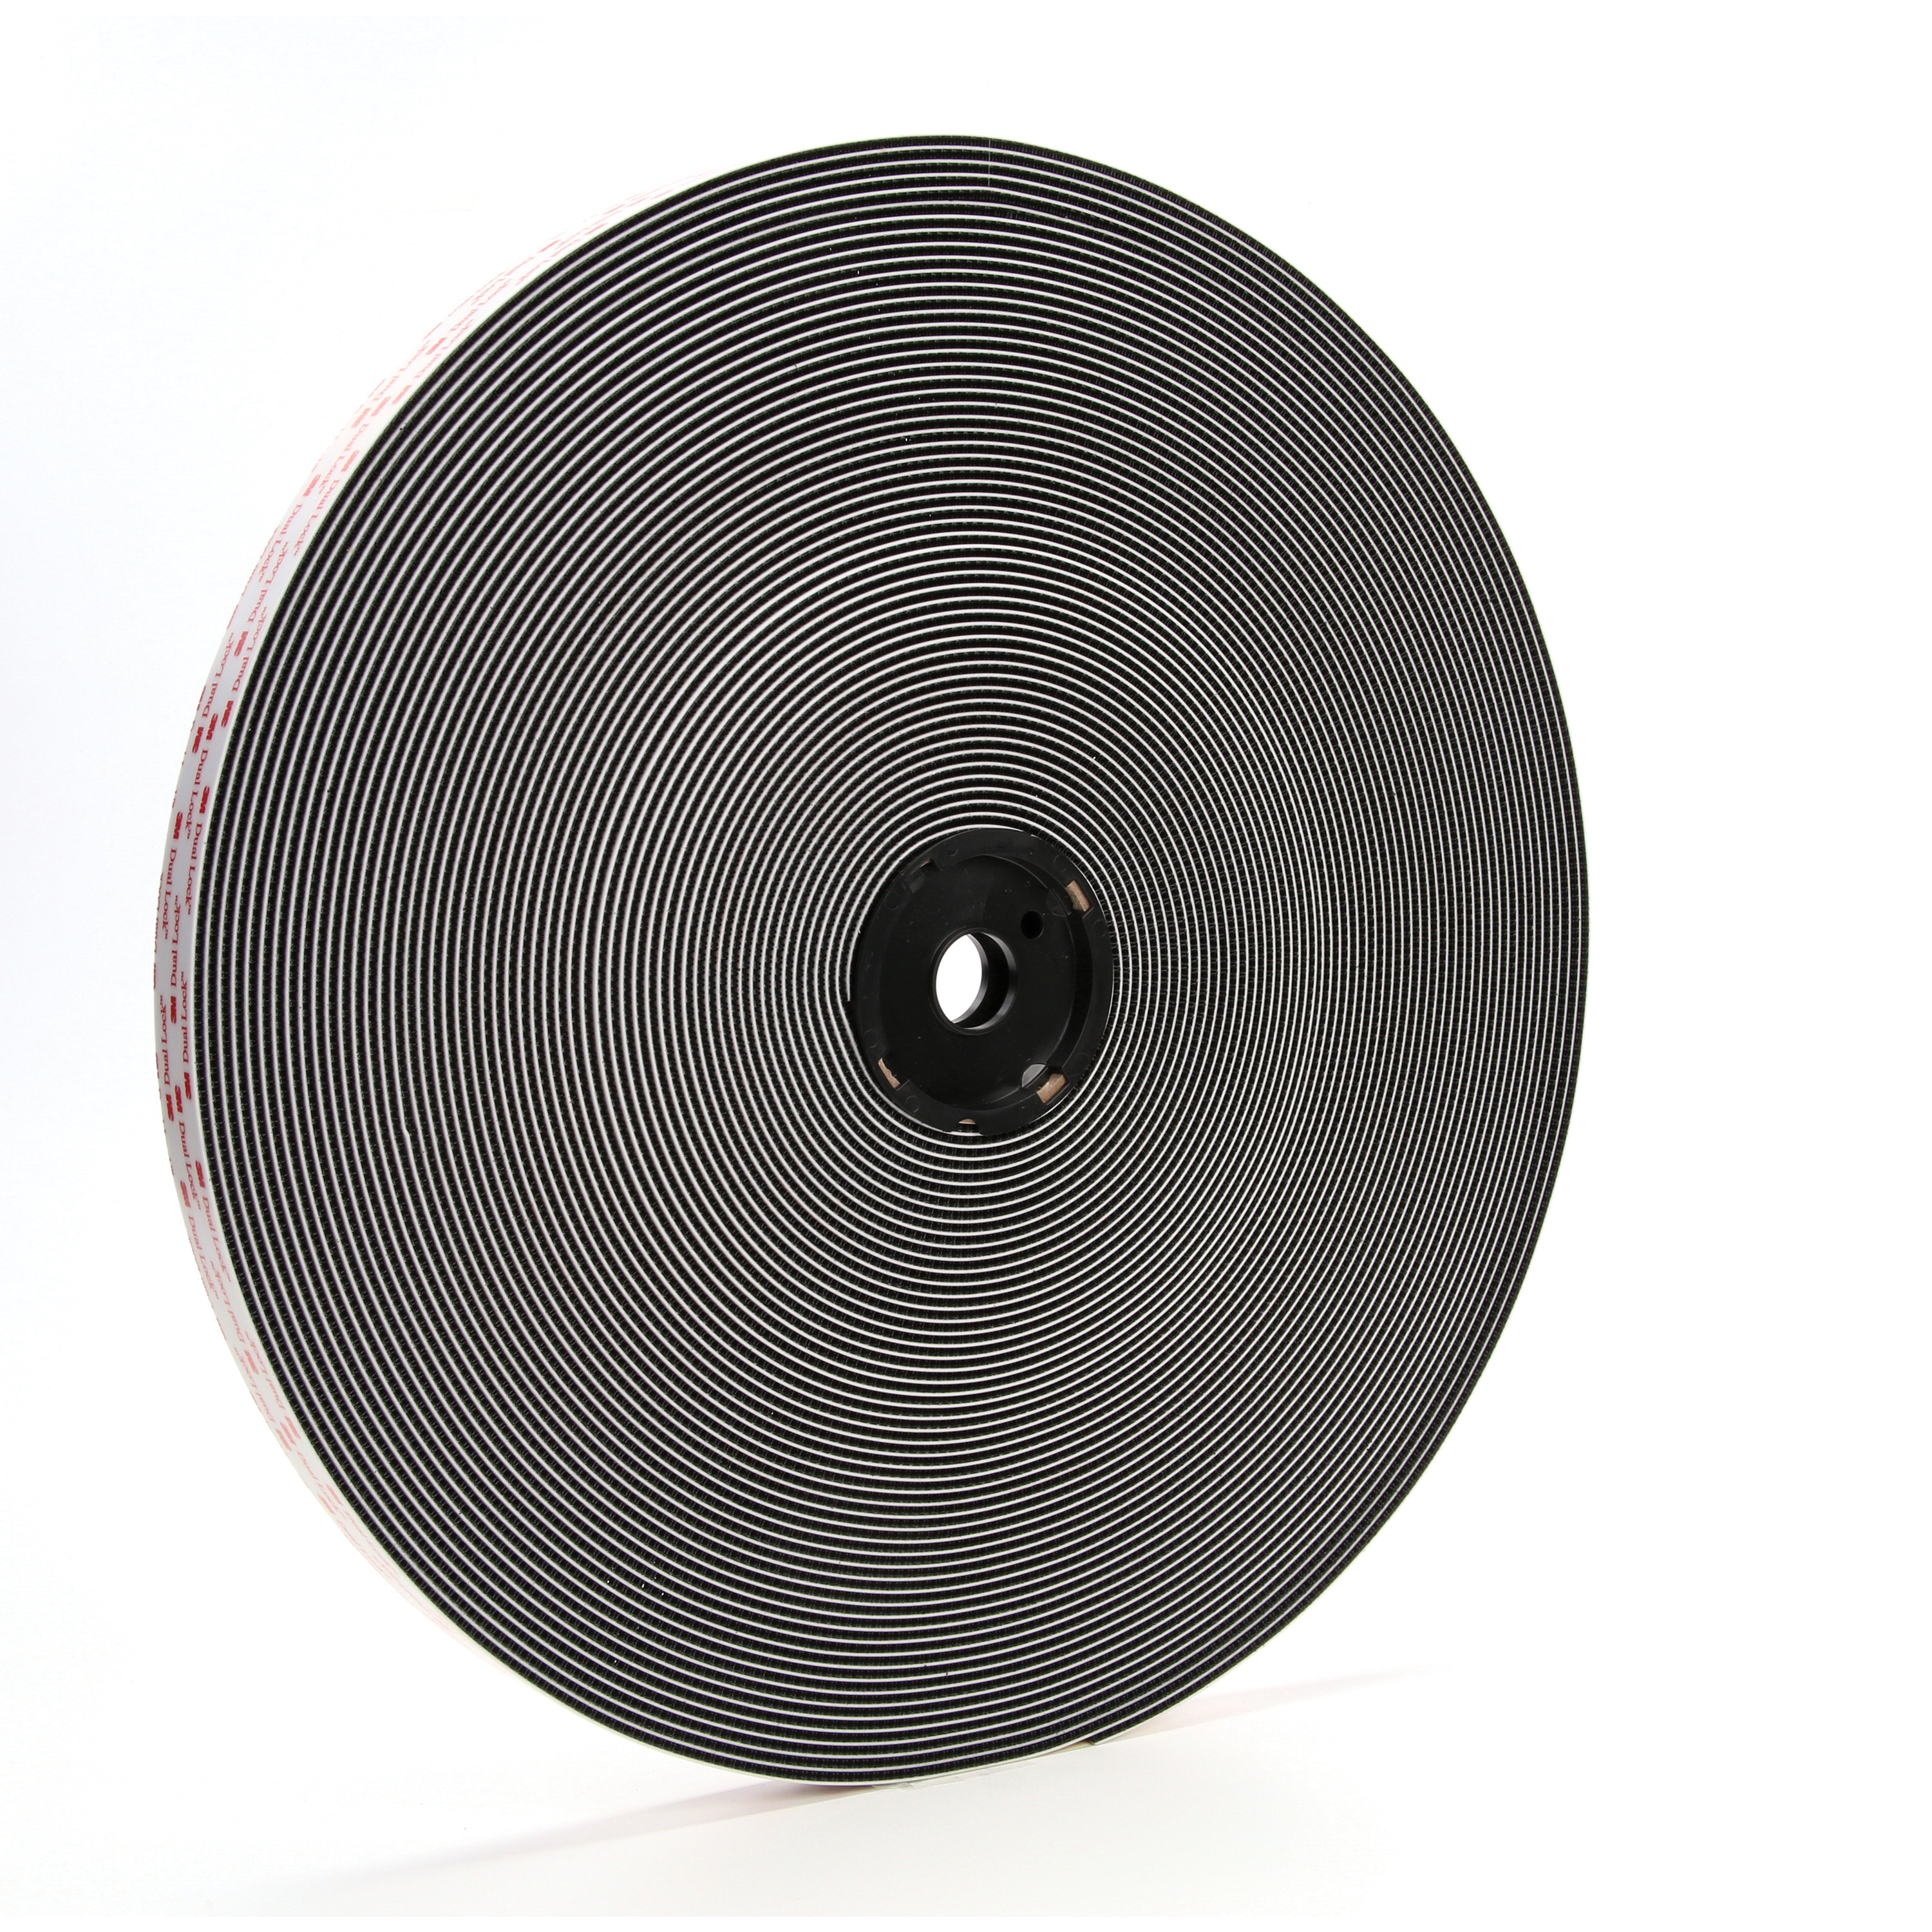 3M™ 021200-65619 General Performance Reclosable Loop Fastener Tape, 50 yd L x 1 in W, 0.15 in THK Engaged, High Tack Rubber Adhesive, Woven Nylon Backing, Black